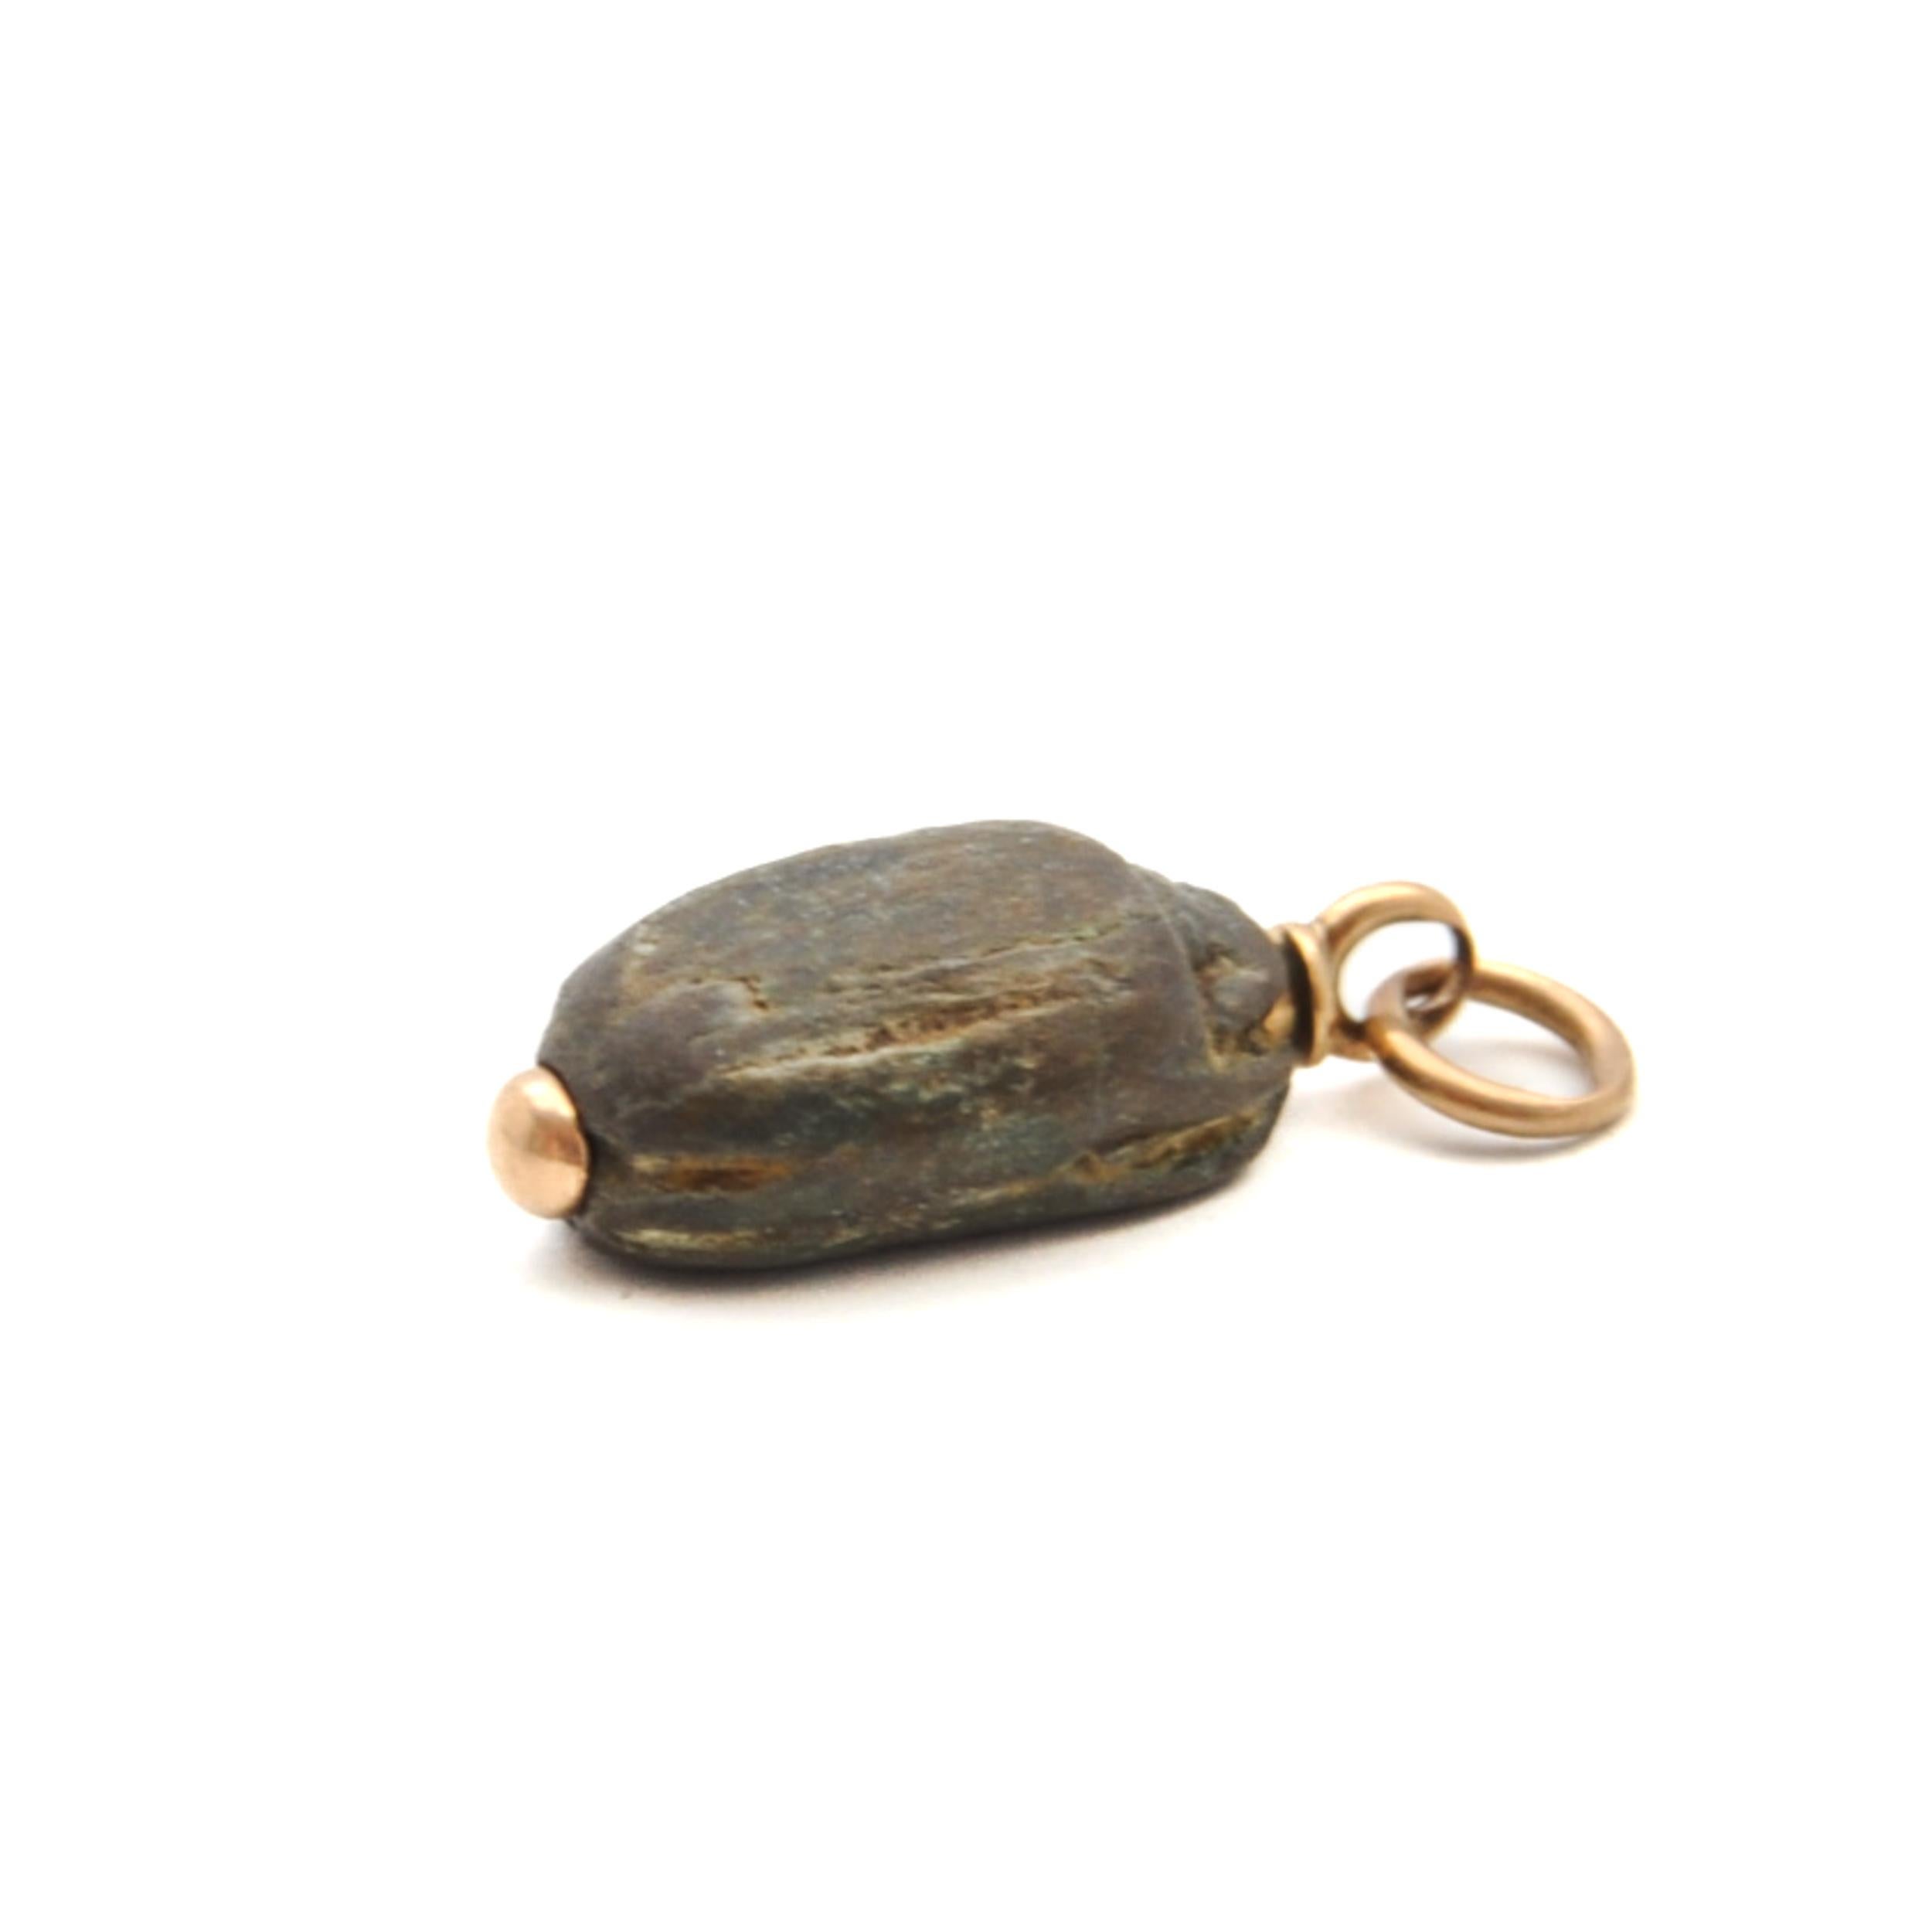 An antique Egyptian scarab charm pendant created in stone and set to a gold bail. In ancient Egypt, scarabs represented resurrection. Like the dung beetle's revolving ball, the scarab became a symbol of birth, life, death, and resurrection. Since